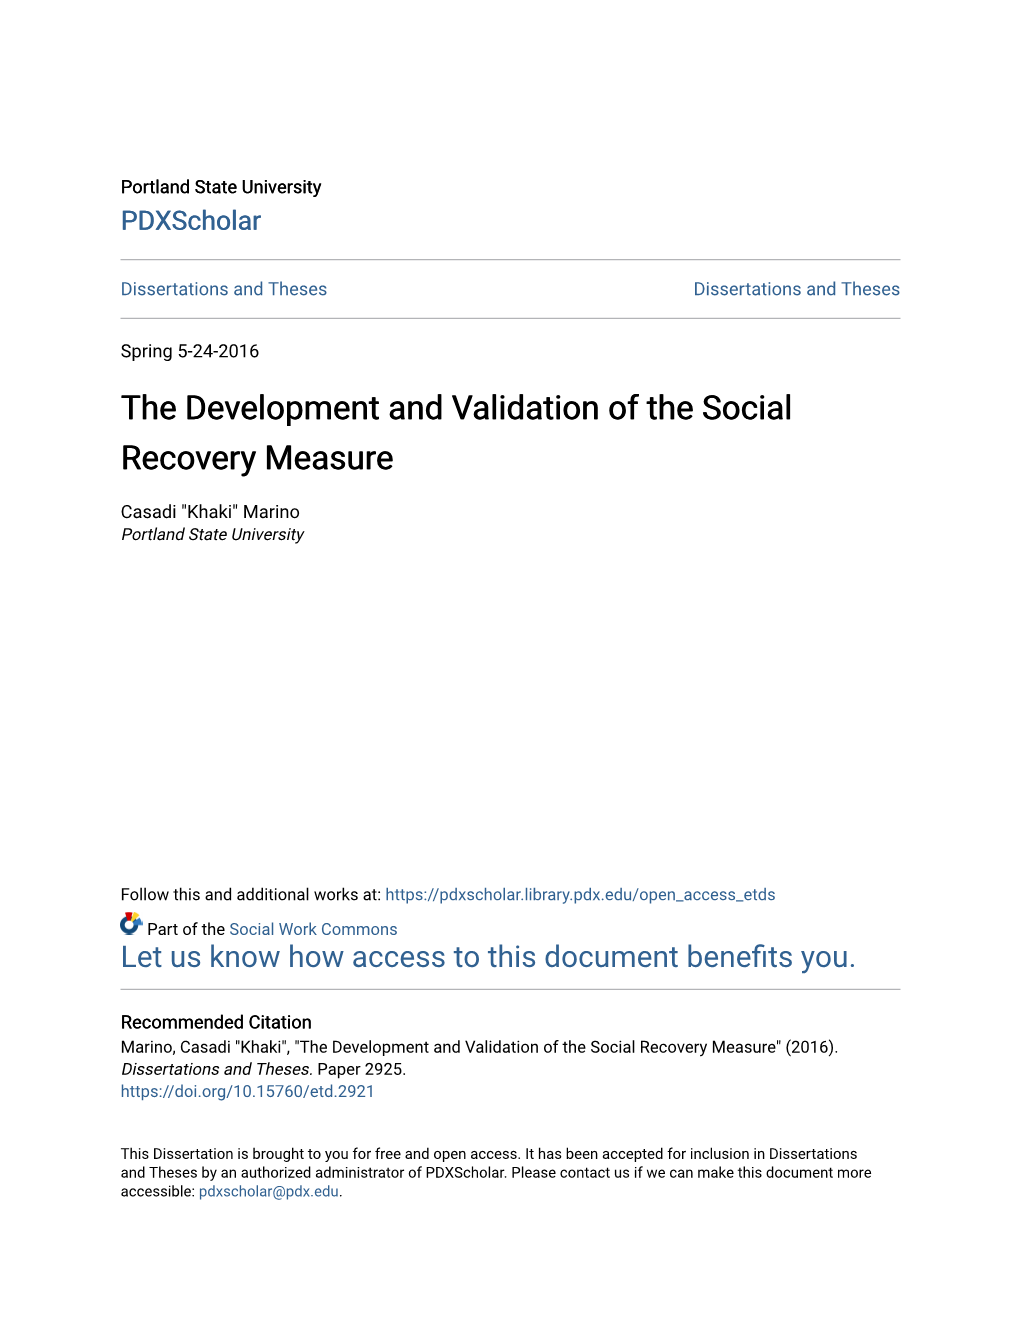 The Development and Validation of the Social Recovery Measure